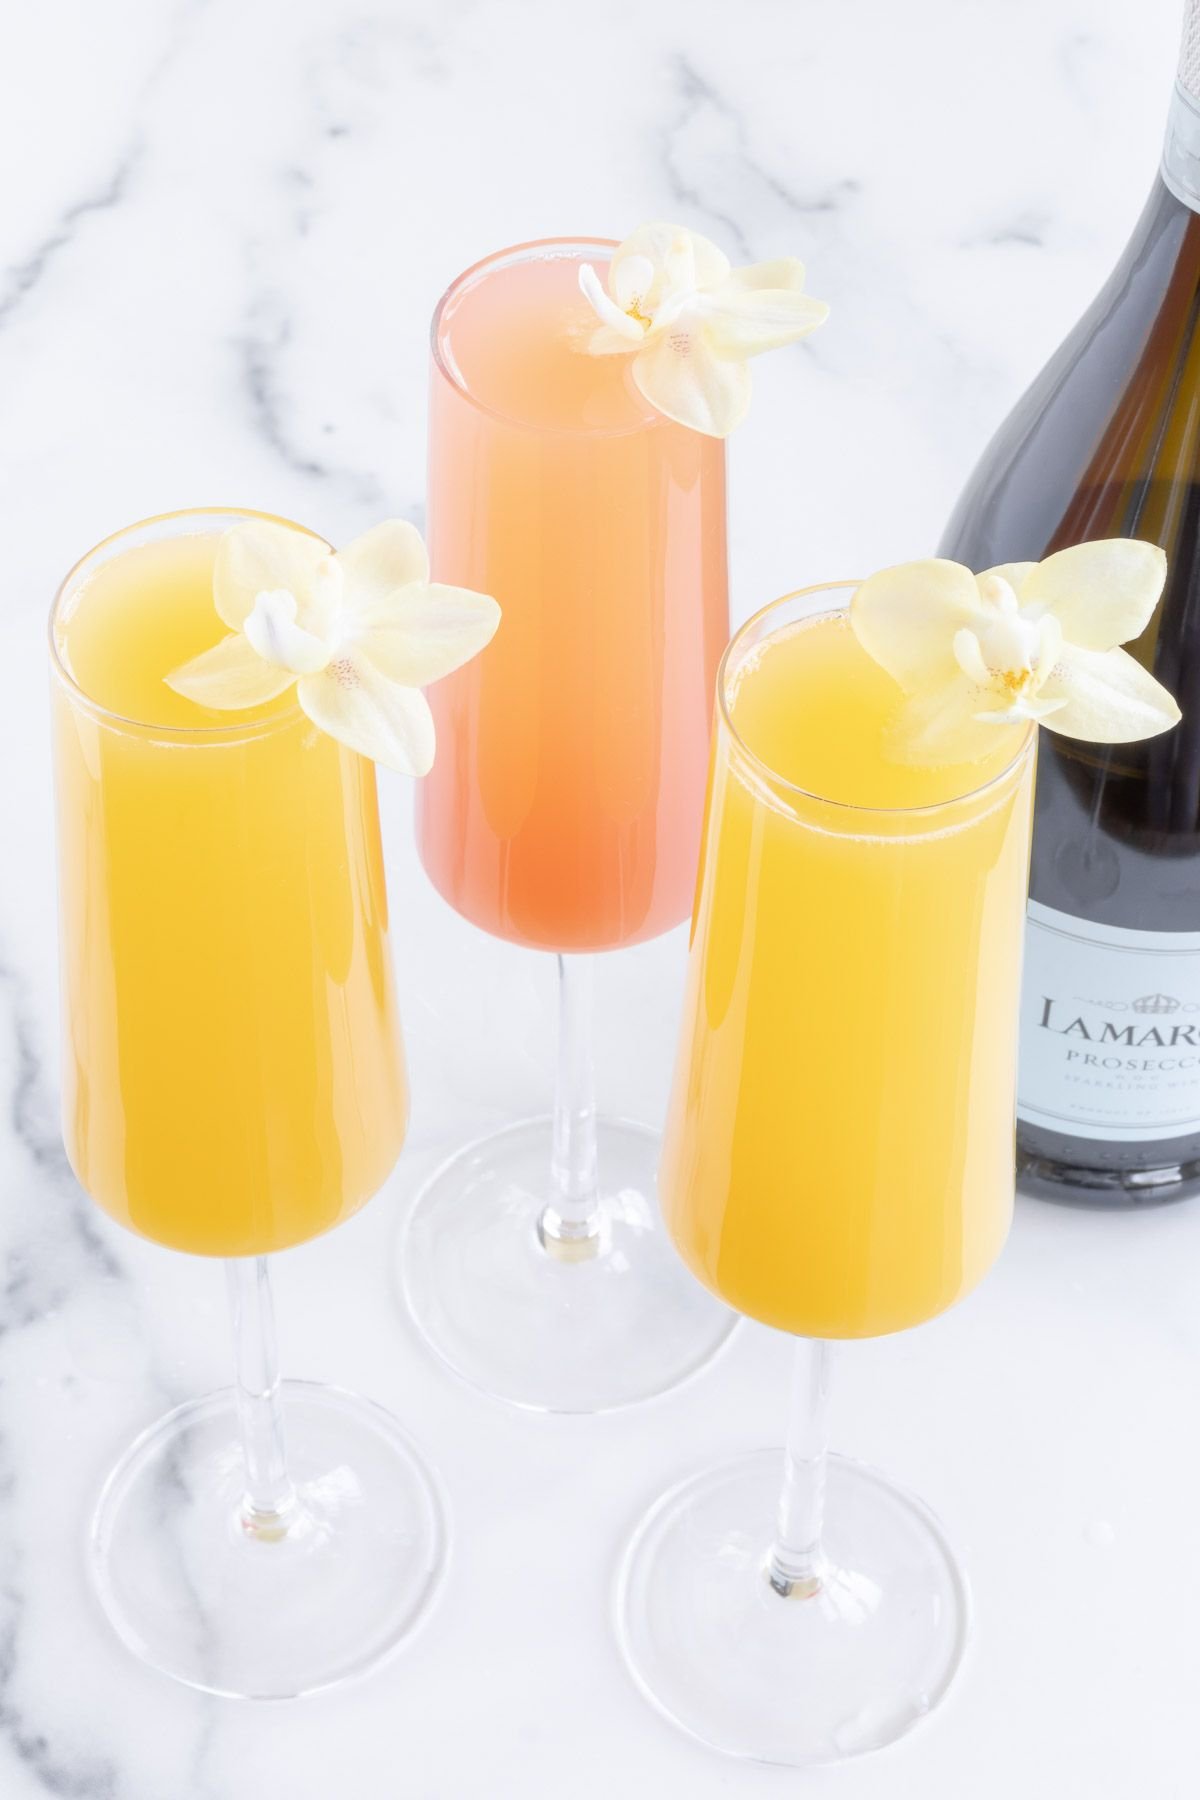 prosecco mimosas garnished with flowers on a marble surface.